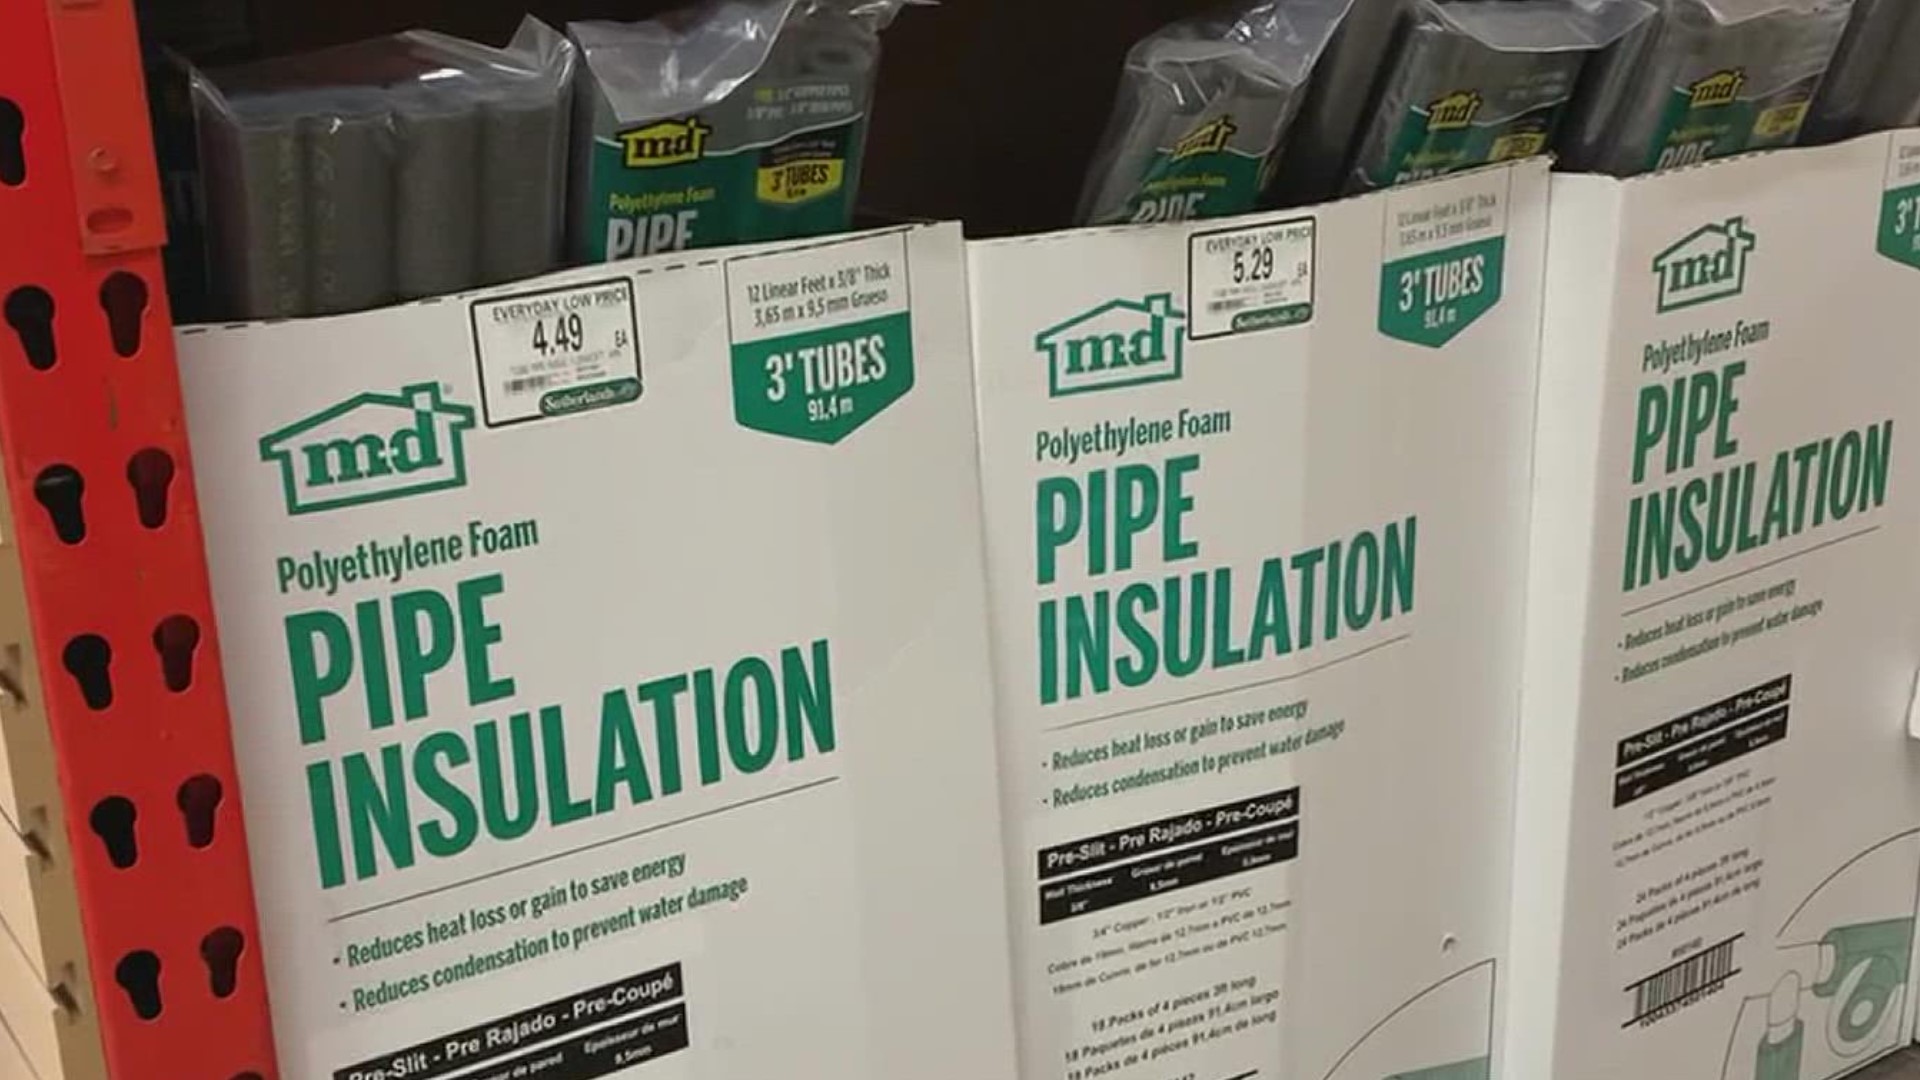 According to McCoy's Building Supply employee, Orion Carpio insulation can help prevent the possibility of a costly repair.